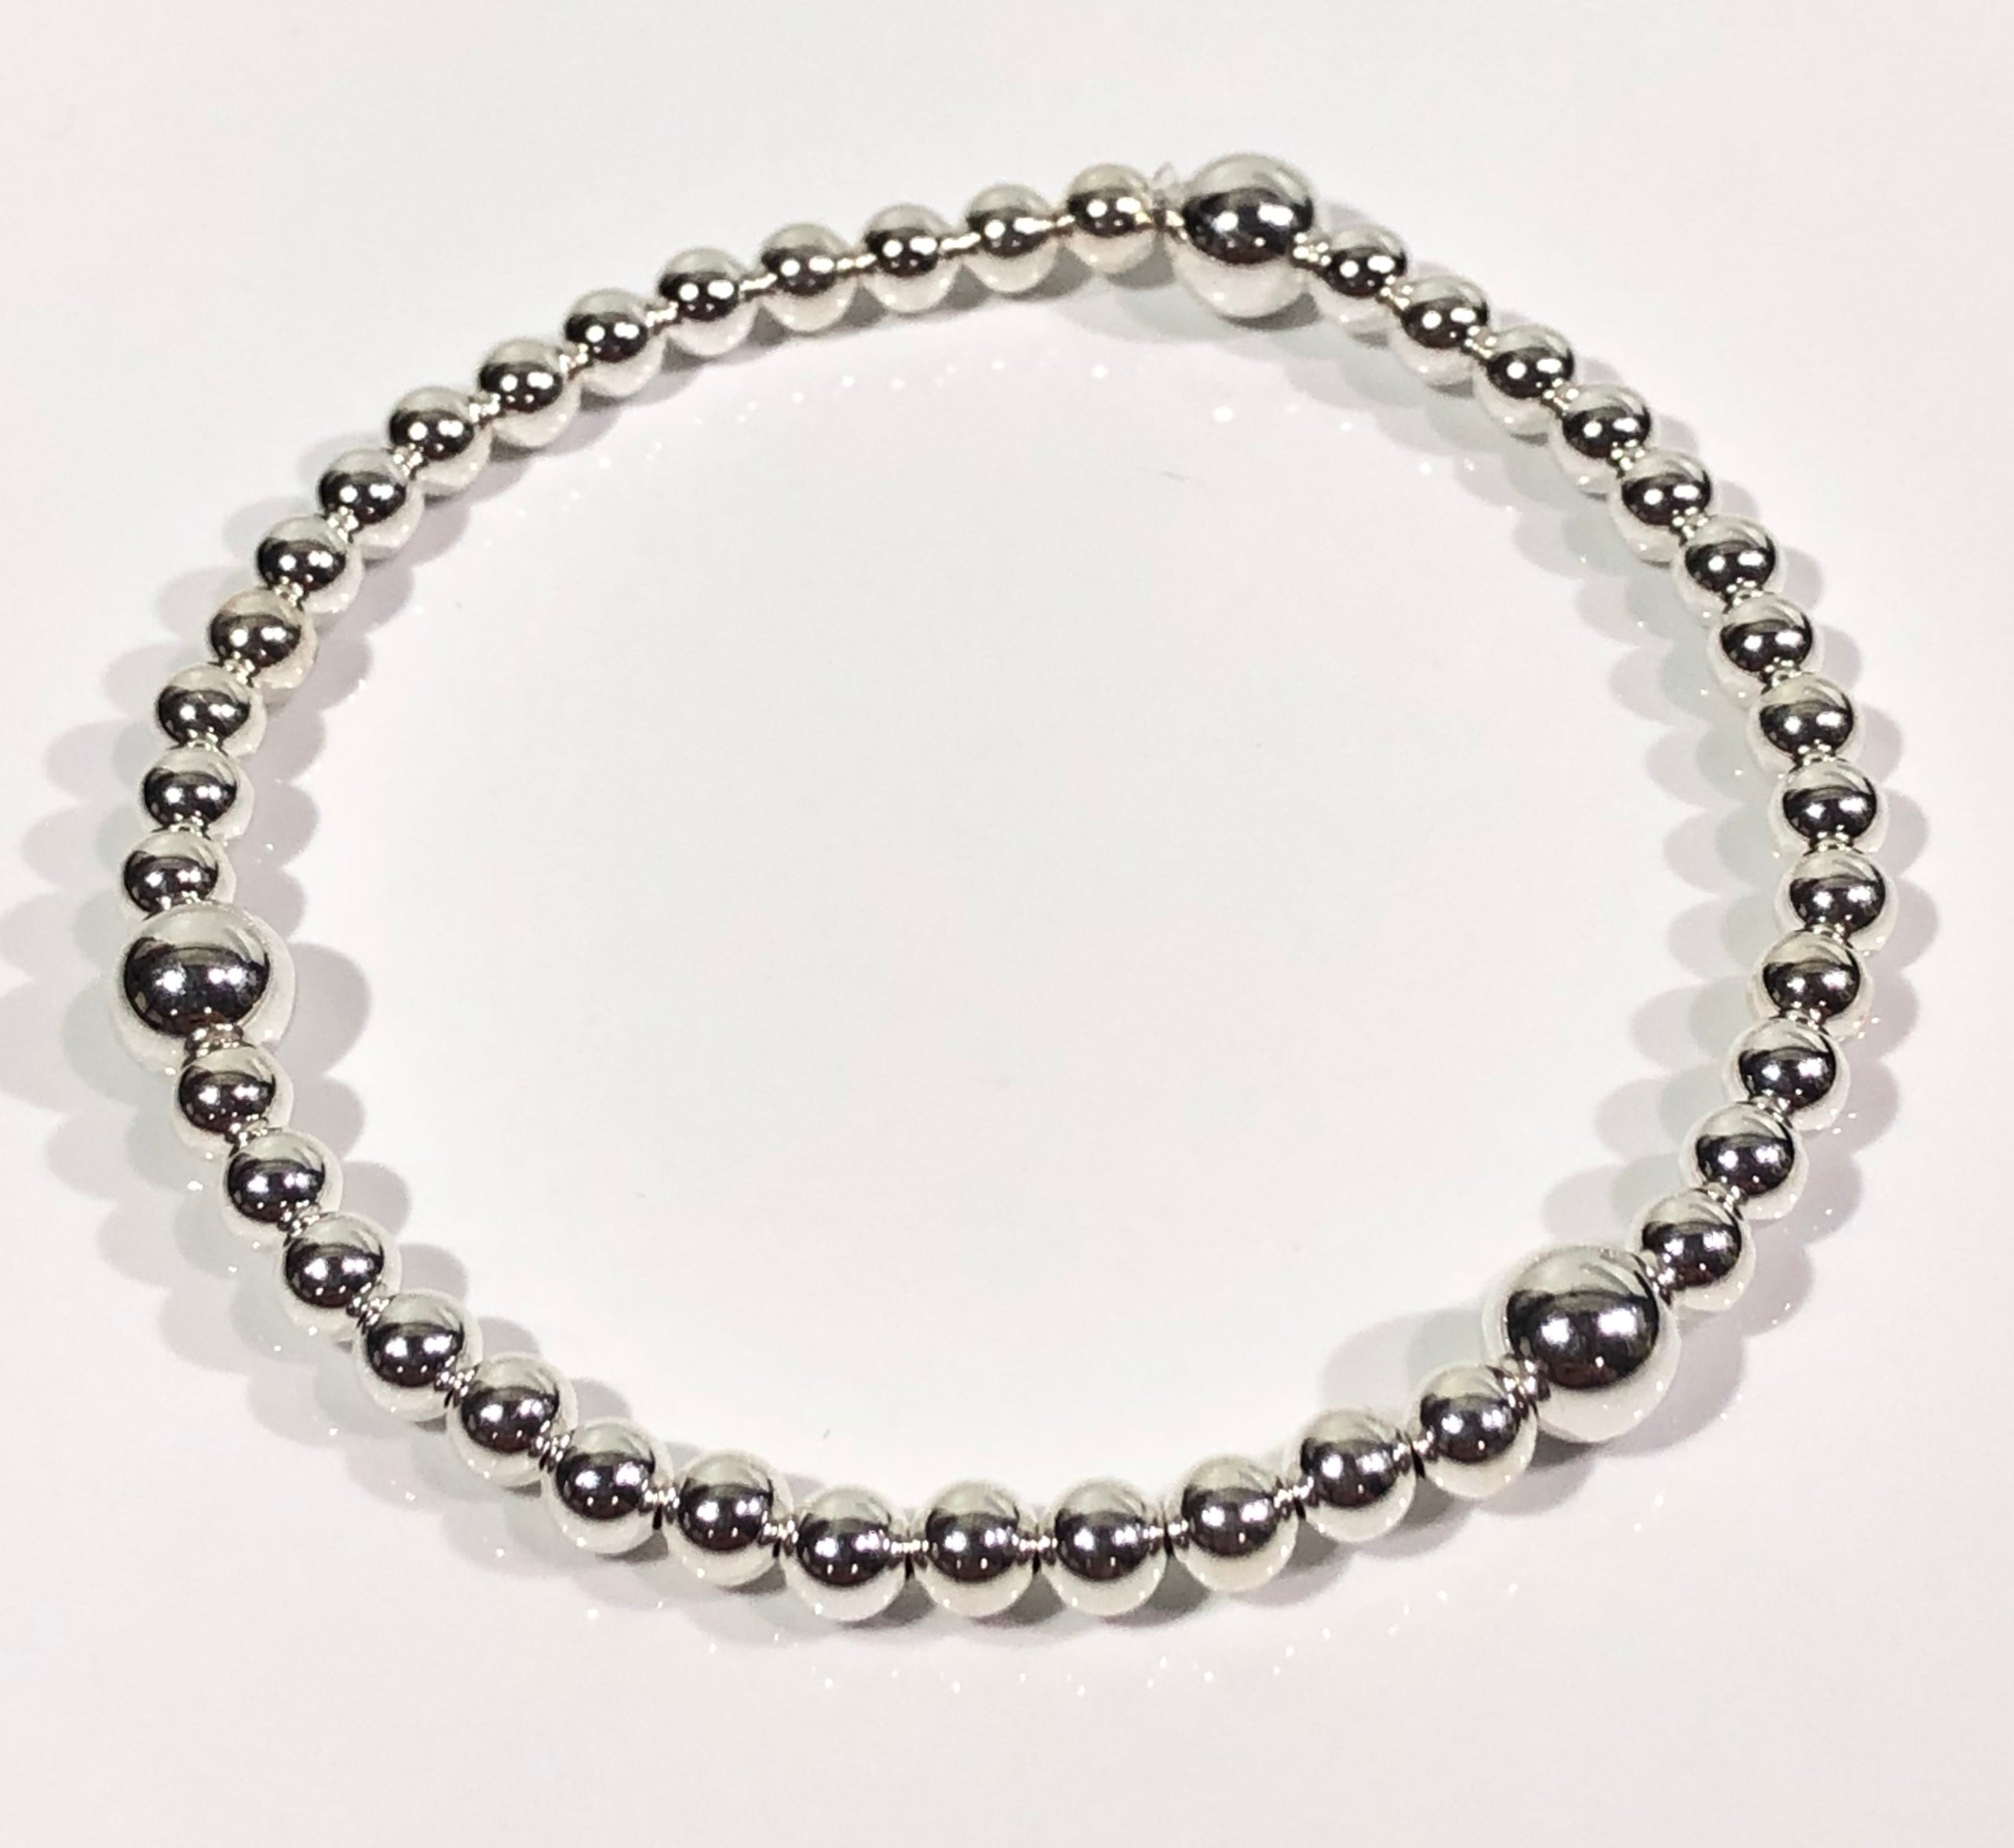 4mm Sterling Silver Bracelet with 3 6mm Beads